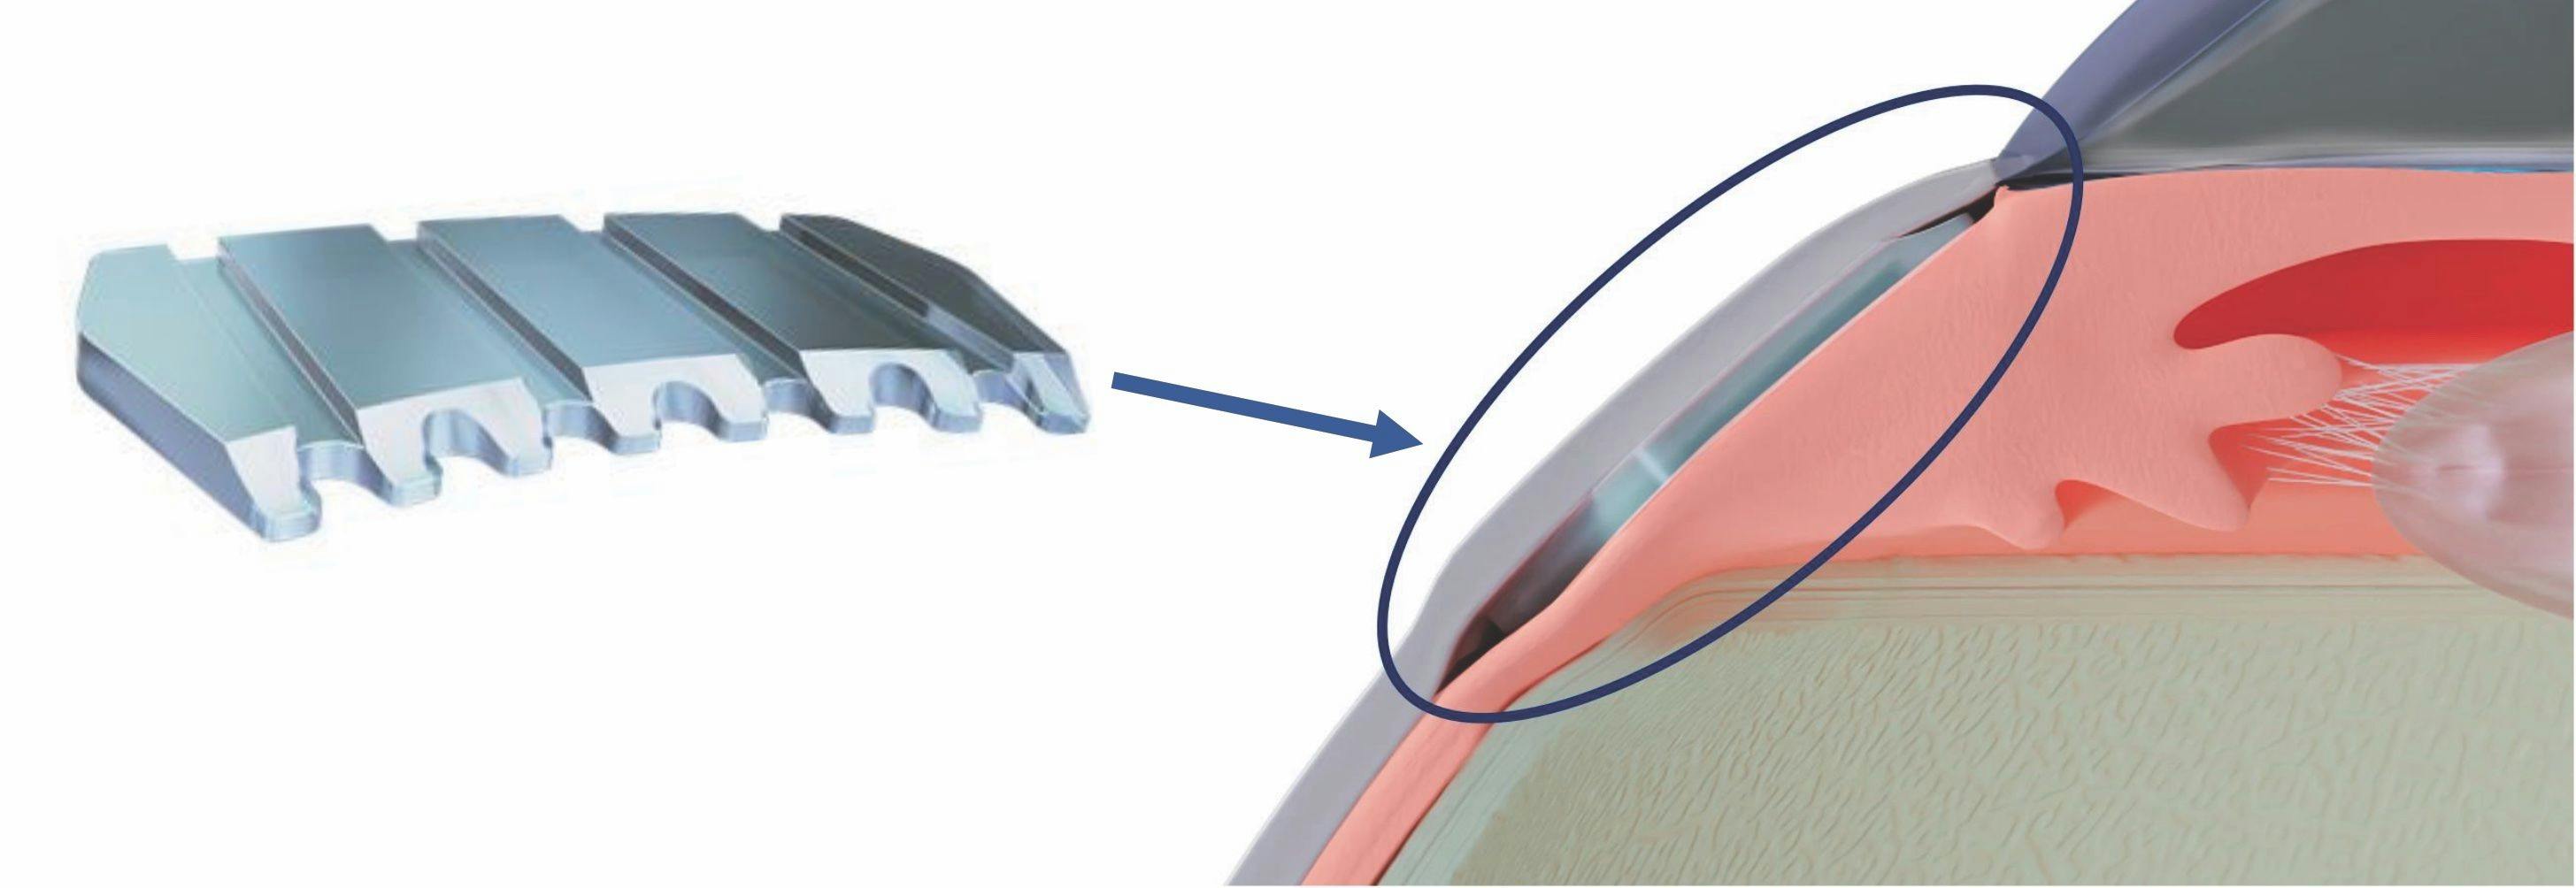 An illustration shows a schematic view of the Cilioscleral Interposition Device (CID). Courtesy Voskanyan, MD, PhD; V. Papoyan, MD; P. Sourdille, MD; O. Benoit, MEng; H. Miroyan, PhD.